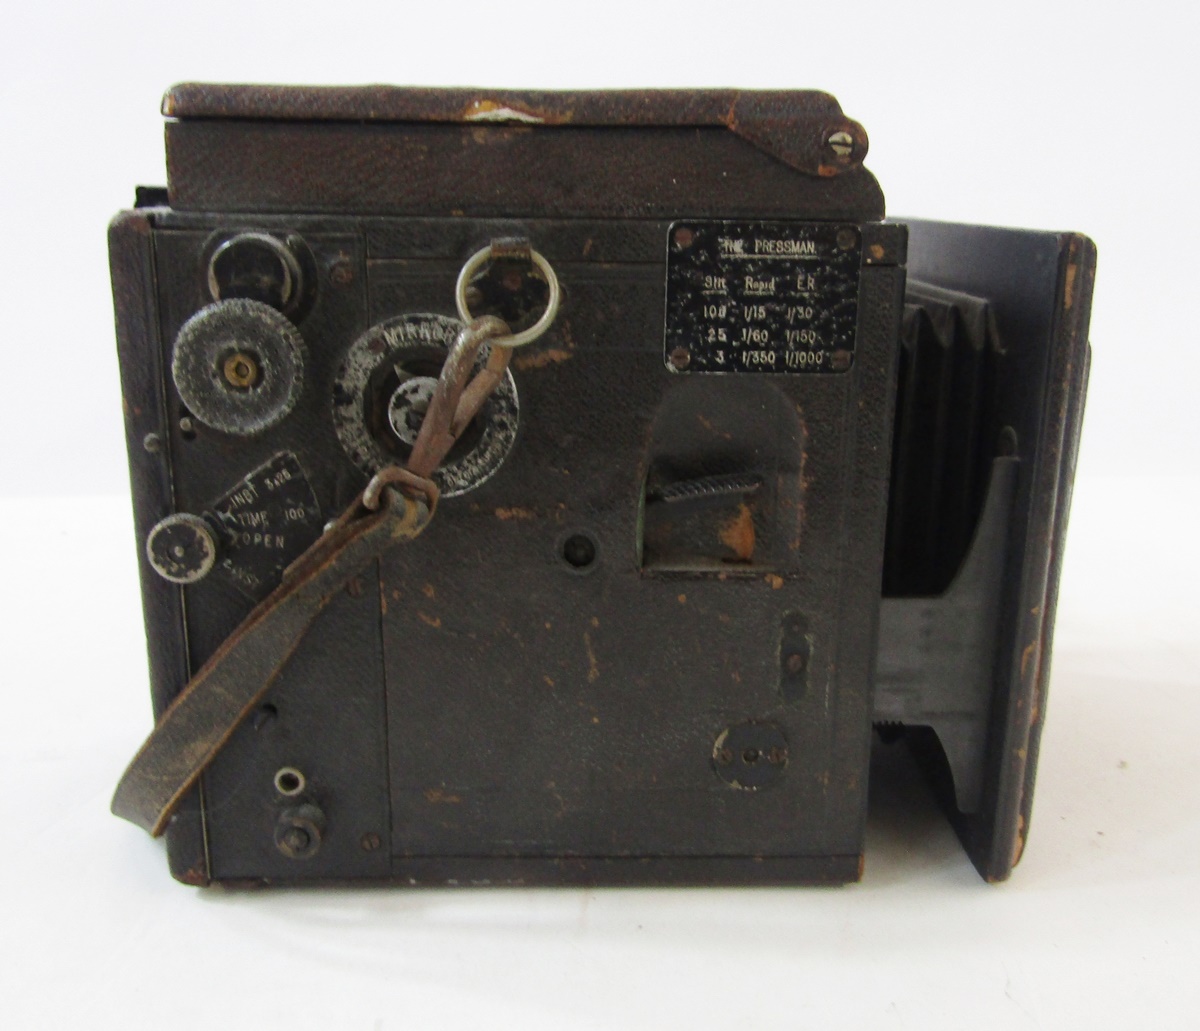 Butcher Popular Pressman camera, makers marks and reference numbers rubbed - Image 3 of 4